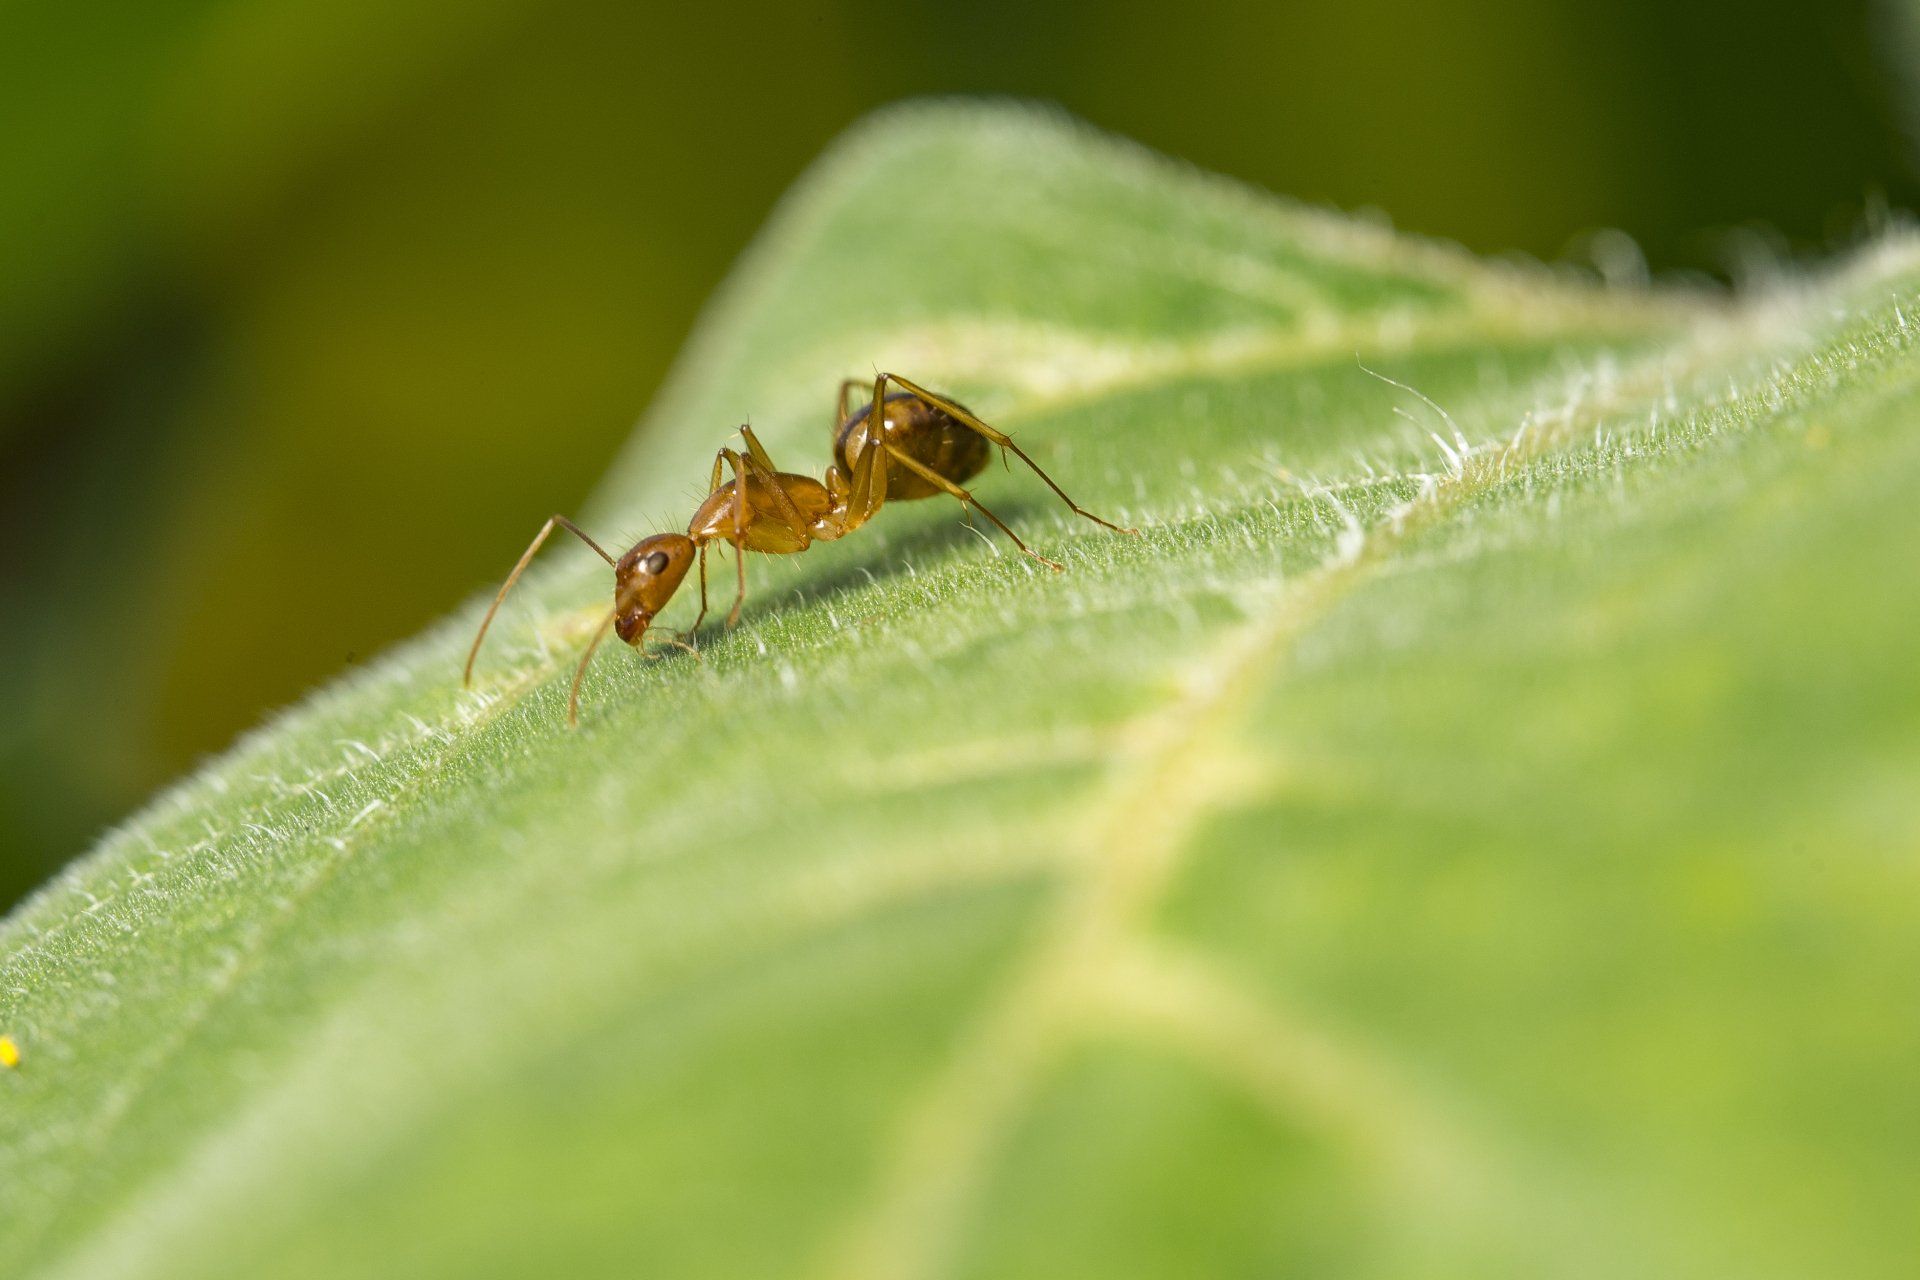 Steve's Pest Control Can Eliminate Any Ant Infestation in Mid-Missouri